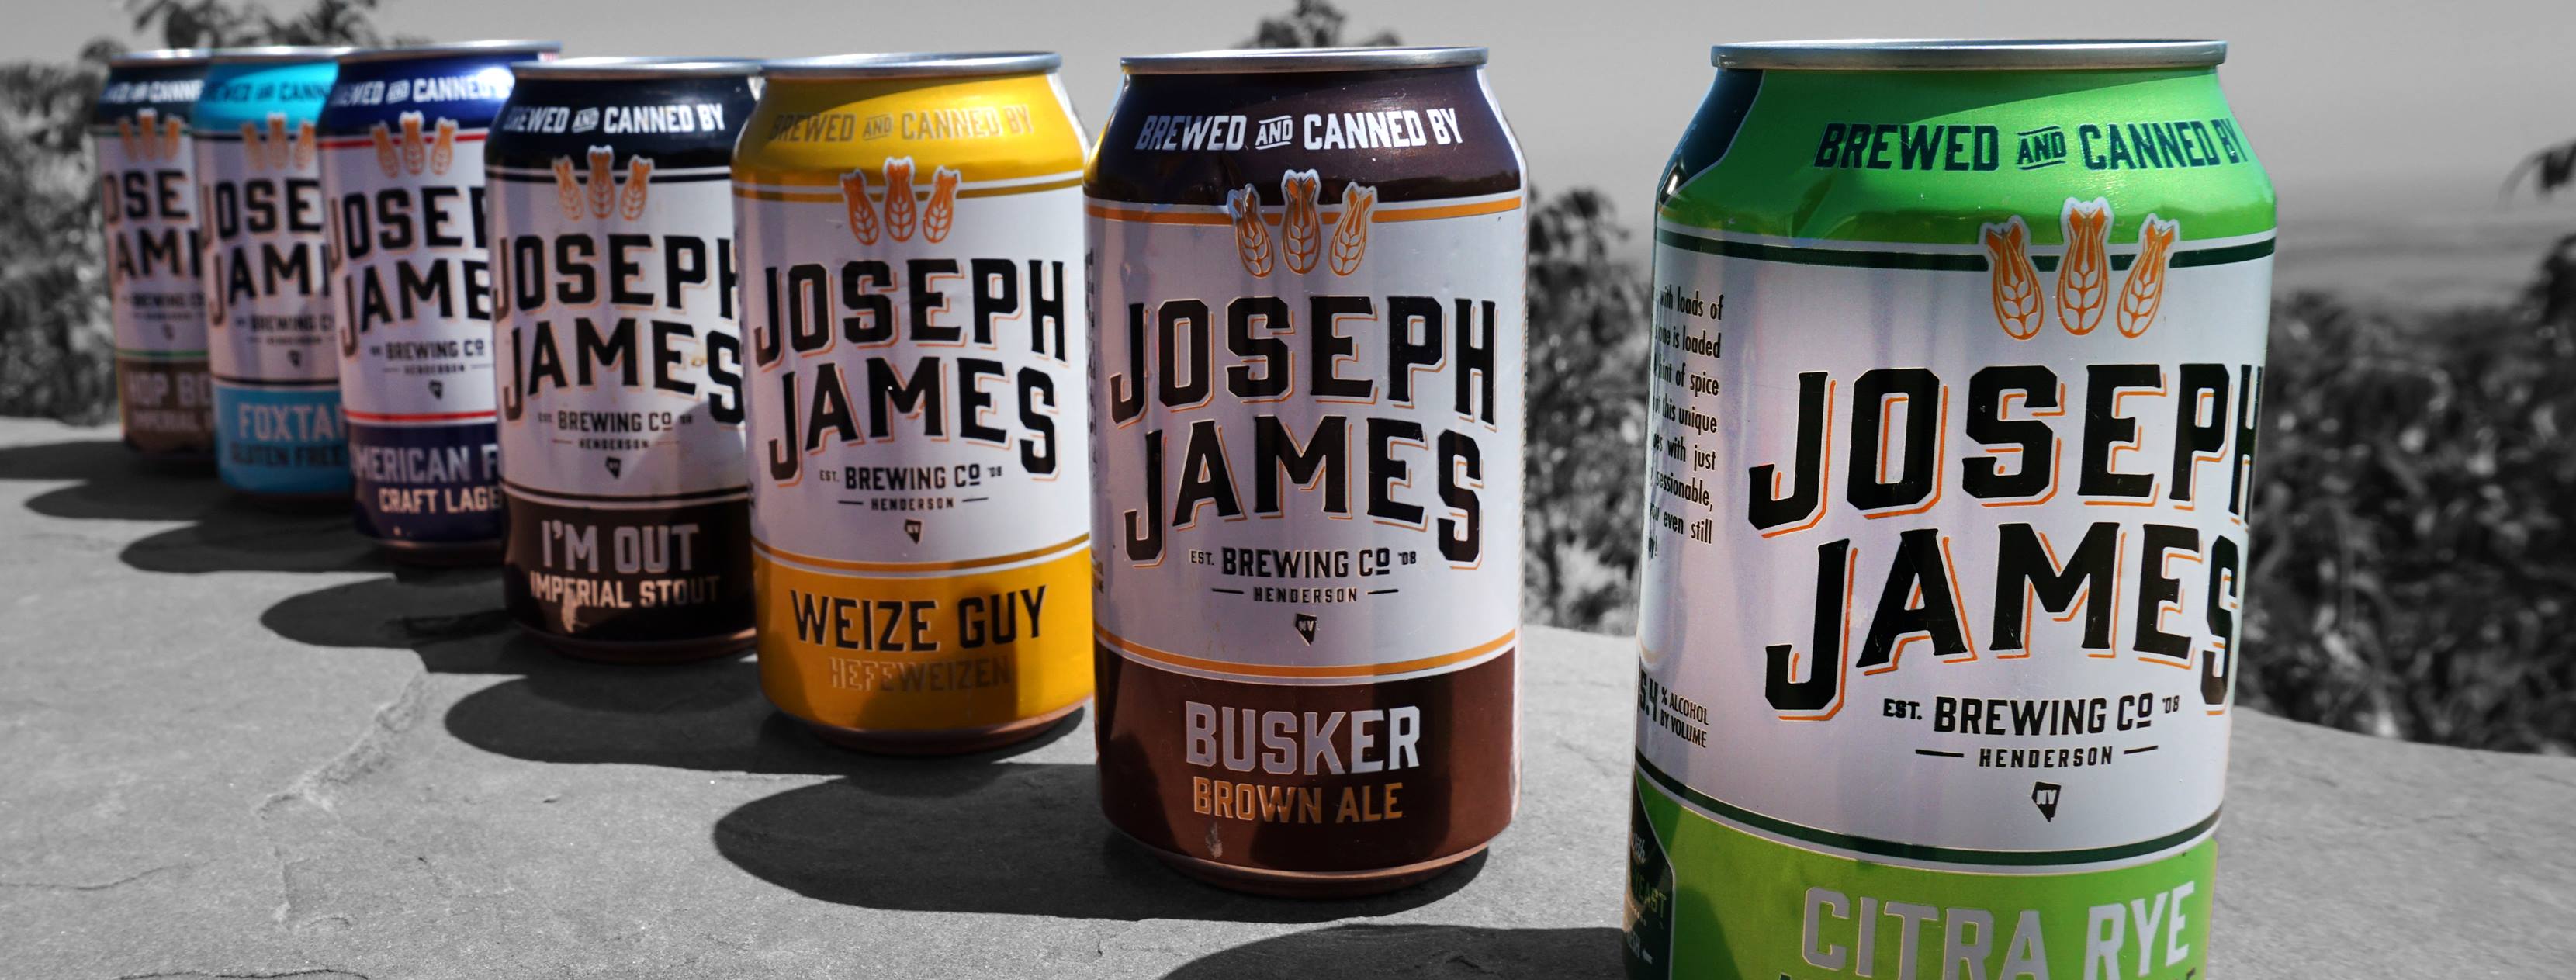 Four cans of Joseph James beer